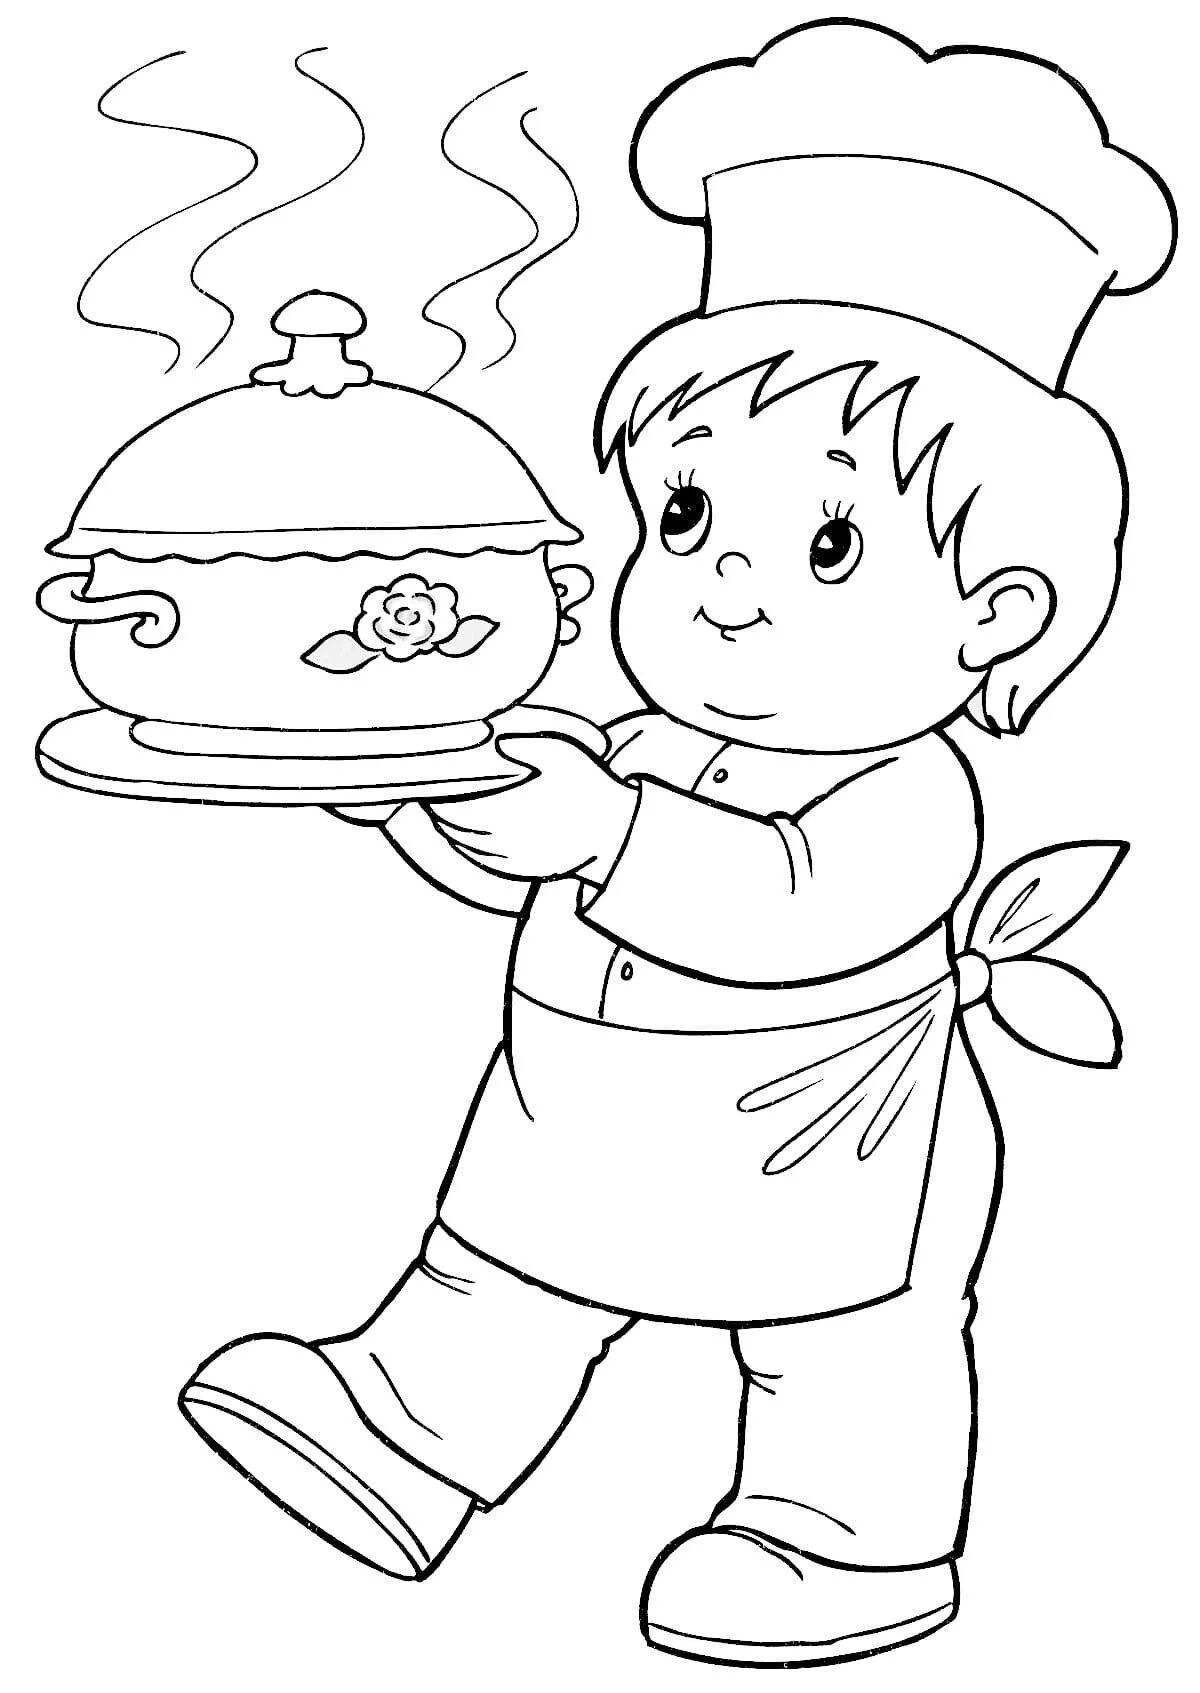 Colorful job coloring pages for preschoolers